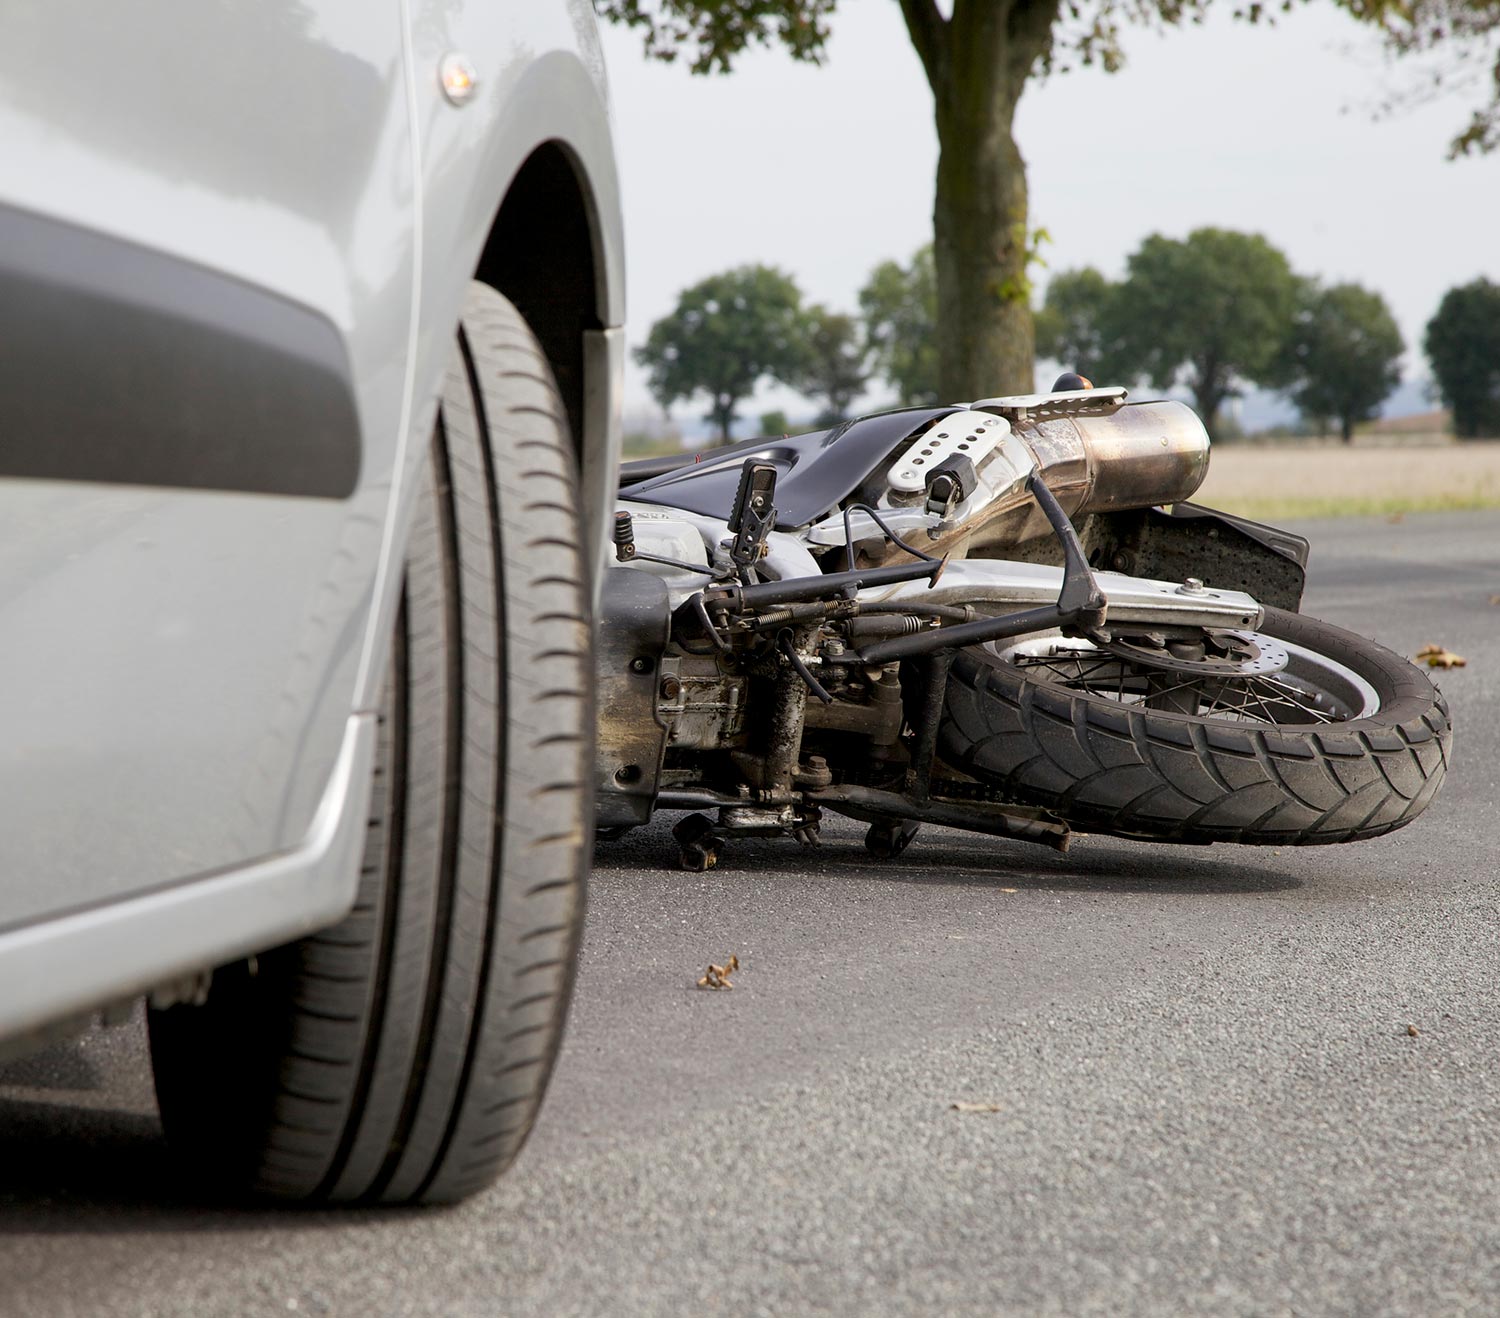 A motorcycle accident lawyer's case site in Las Vegas, NV